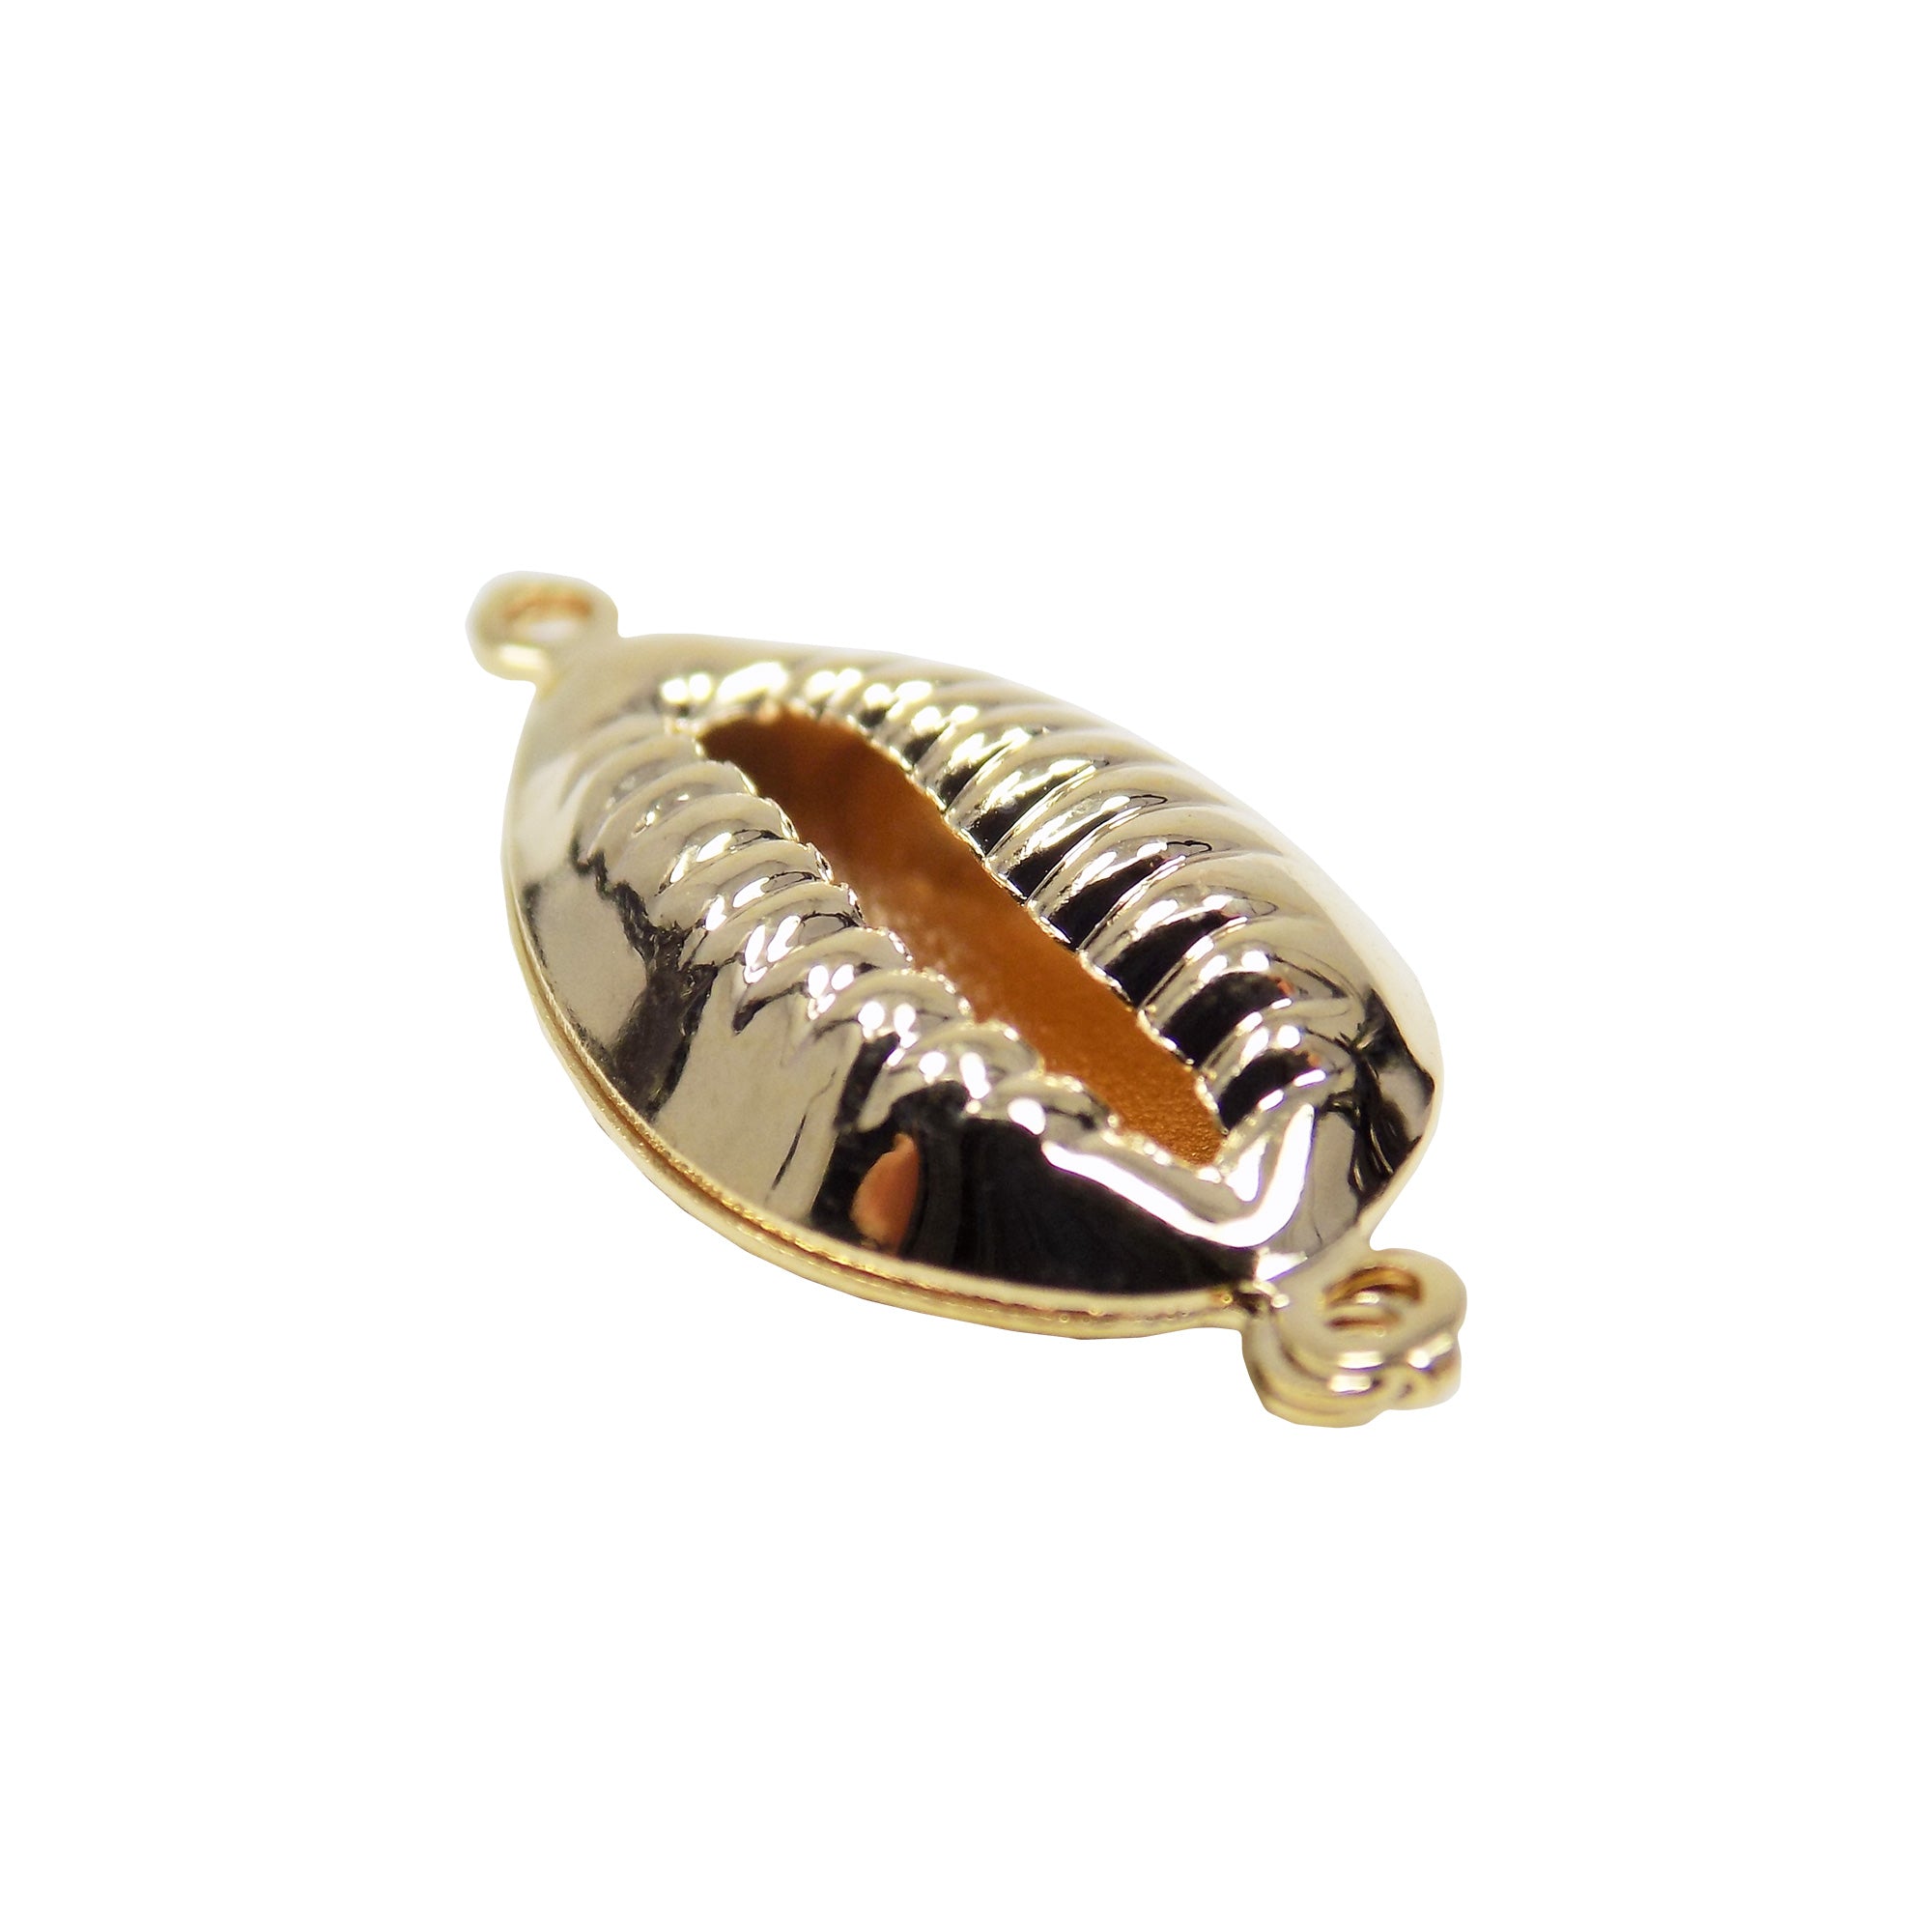 Shell Connector Gold Plated 18K over Brass Size 22.6x10.4mm, Seashell Connector with two loops, Sea Pendant Wholesale, Excellent Quality